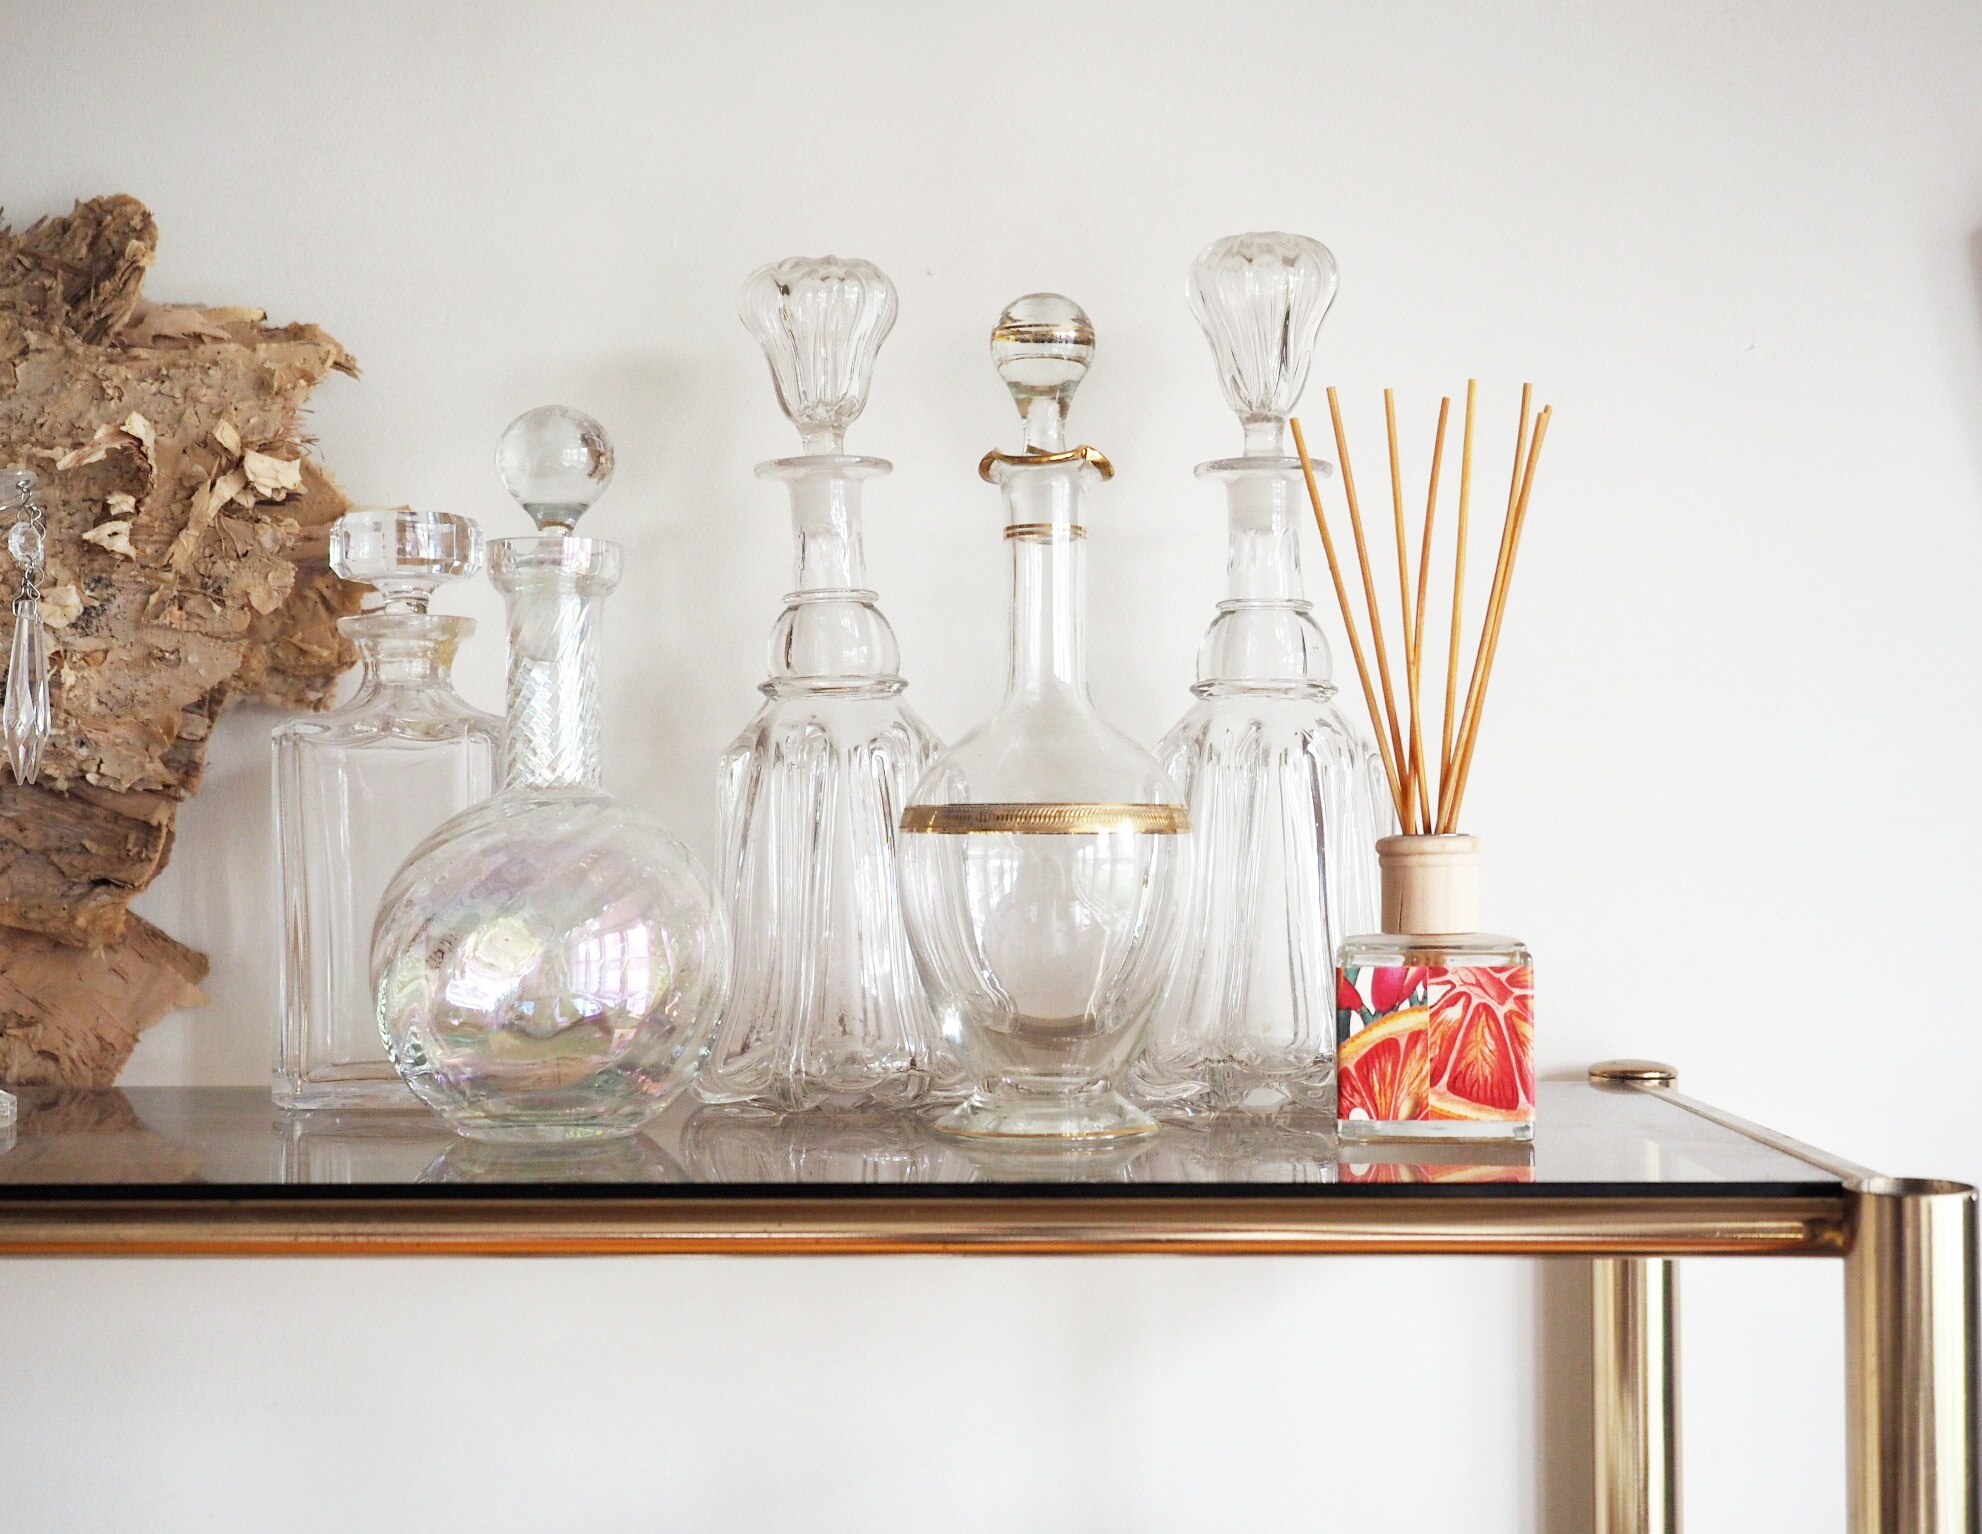 Lead in antique crystal decanters : dangerous or not? — FUTURE